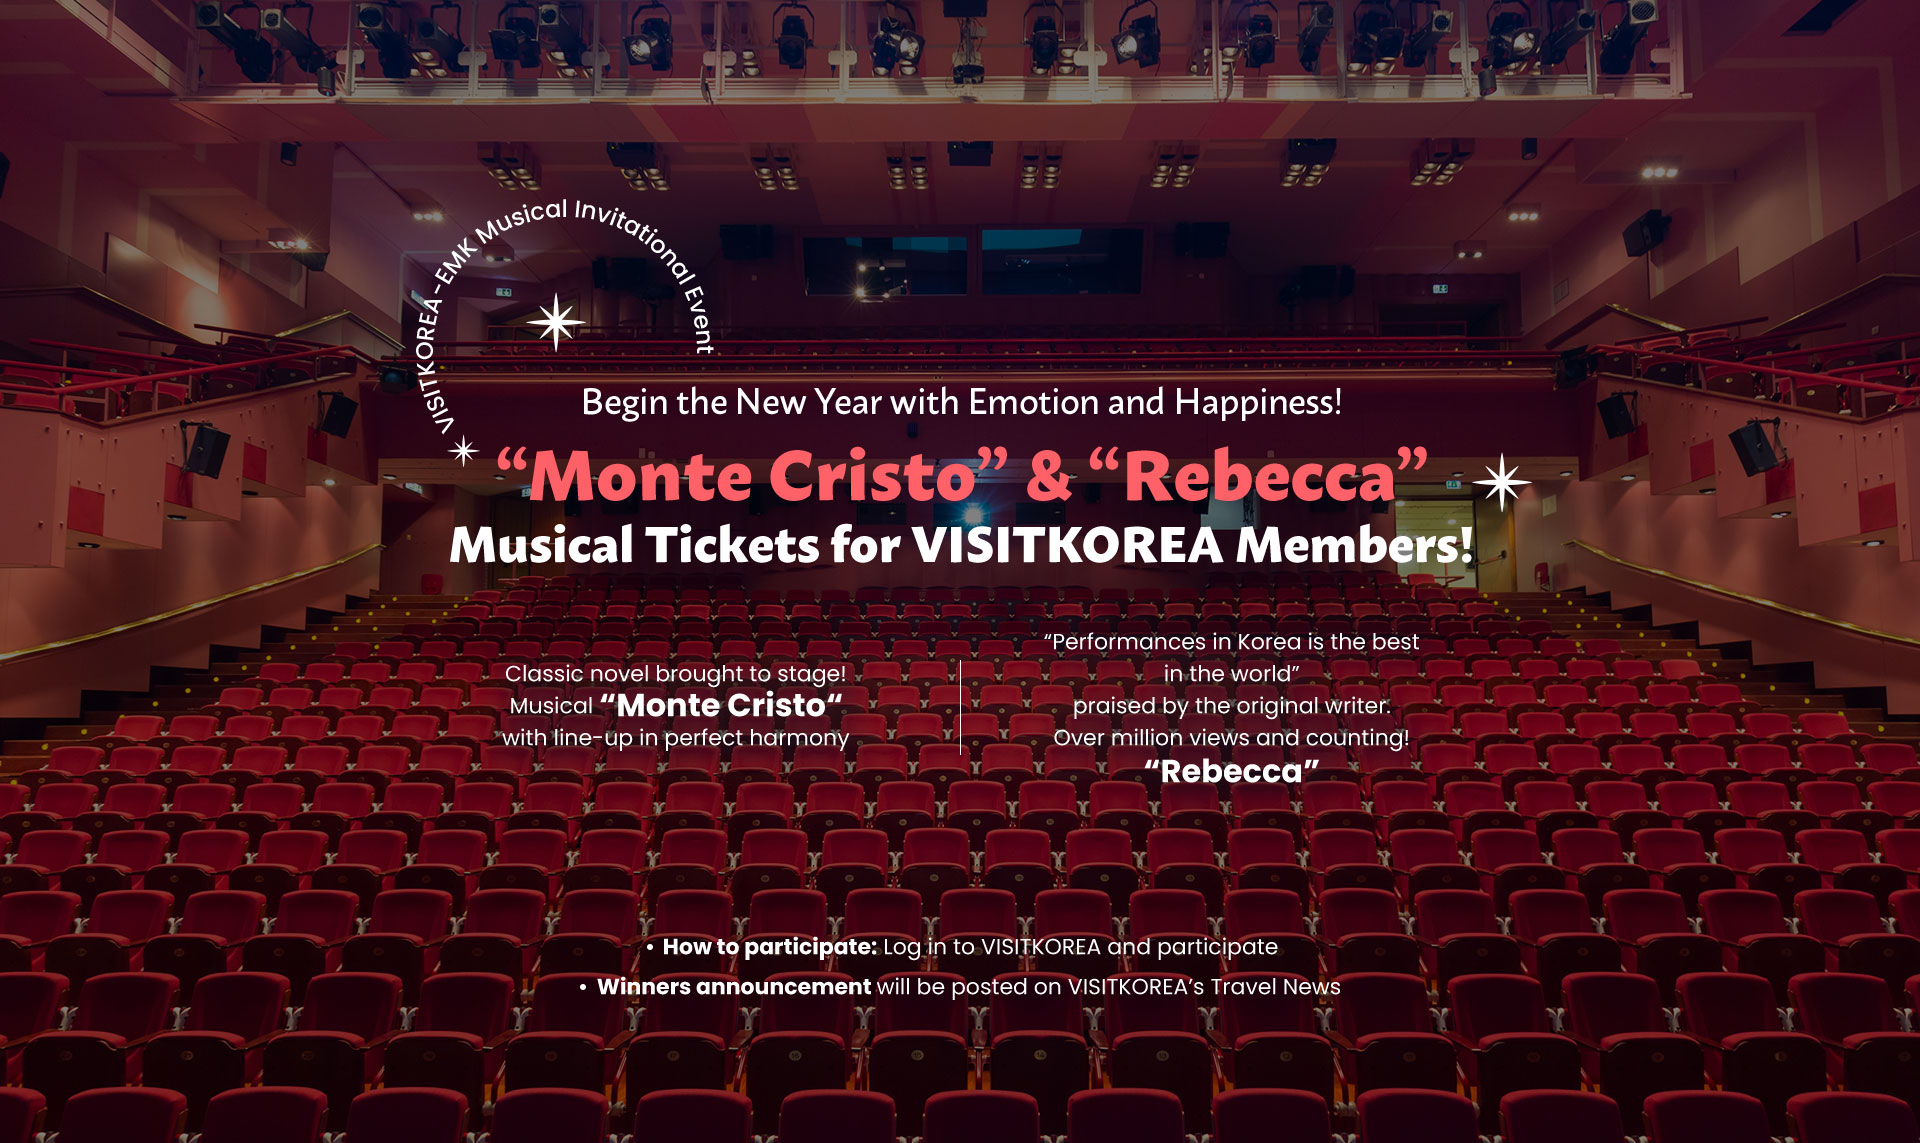 Begin the New Year with Emotion and Happiness! “Monte Cristo” & “Rebecca” Musical Tickets for VISITKOREA Members! Classic novel brought to stage! Musical “Monte Cristo“ with line-up in perfect harmony “Performances in Korea is the best in the world” praised by the original writer. Over million views and counting! “Rebecca” How to participate: Log in to VISITKOREA and participate Winners announcement will be posted on VISITKOREA’s Travel News